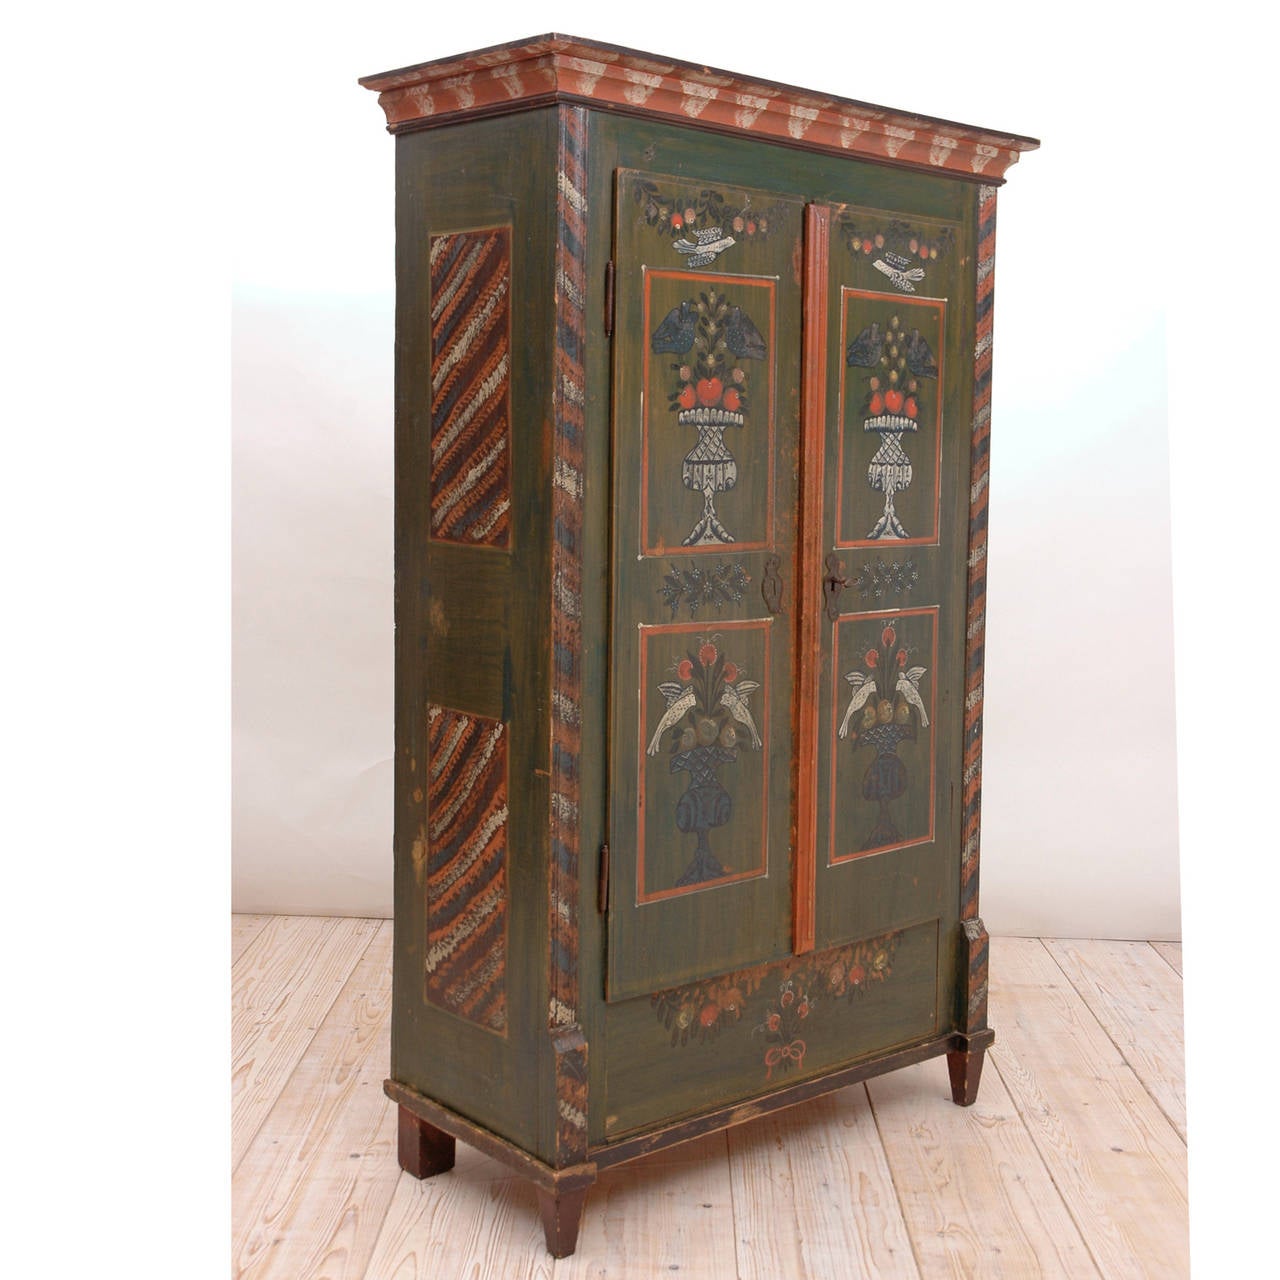 A charming piece of European Folk Art probably from the Alsace Lorraine region, this marriage armoire has the naiveté born of nascent love! With painted panels depicting doves and hummingbirds hovering over stylized urns brimming forth with ripe